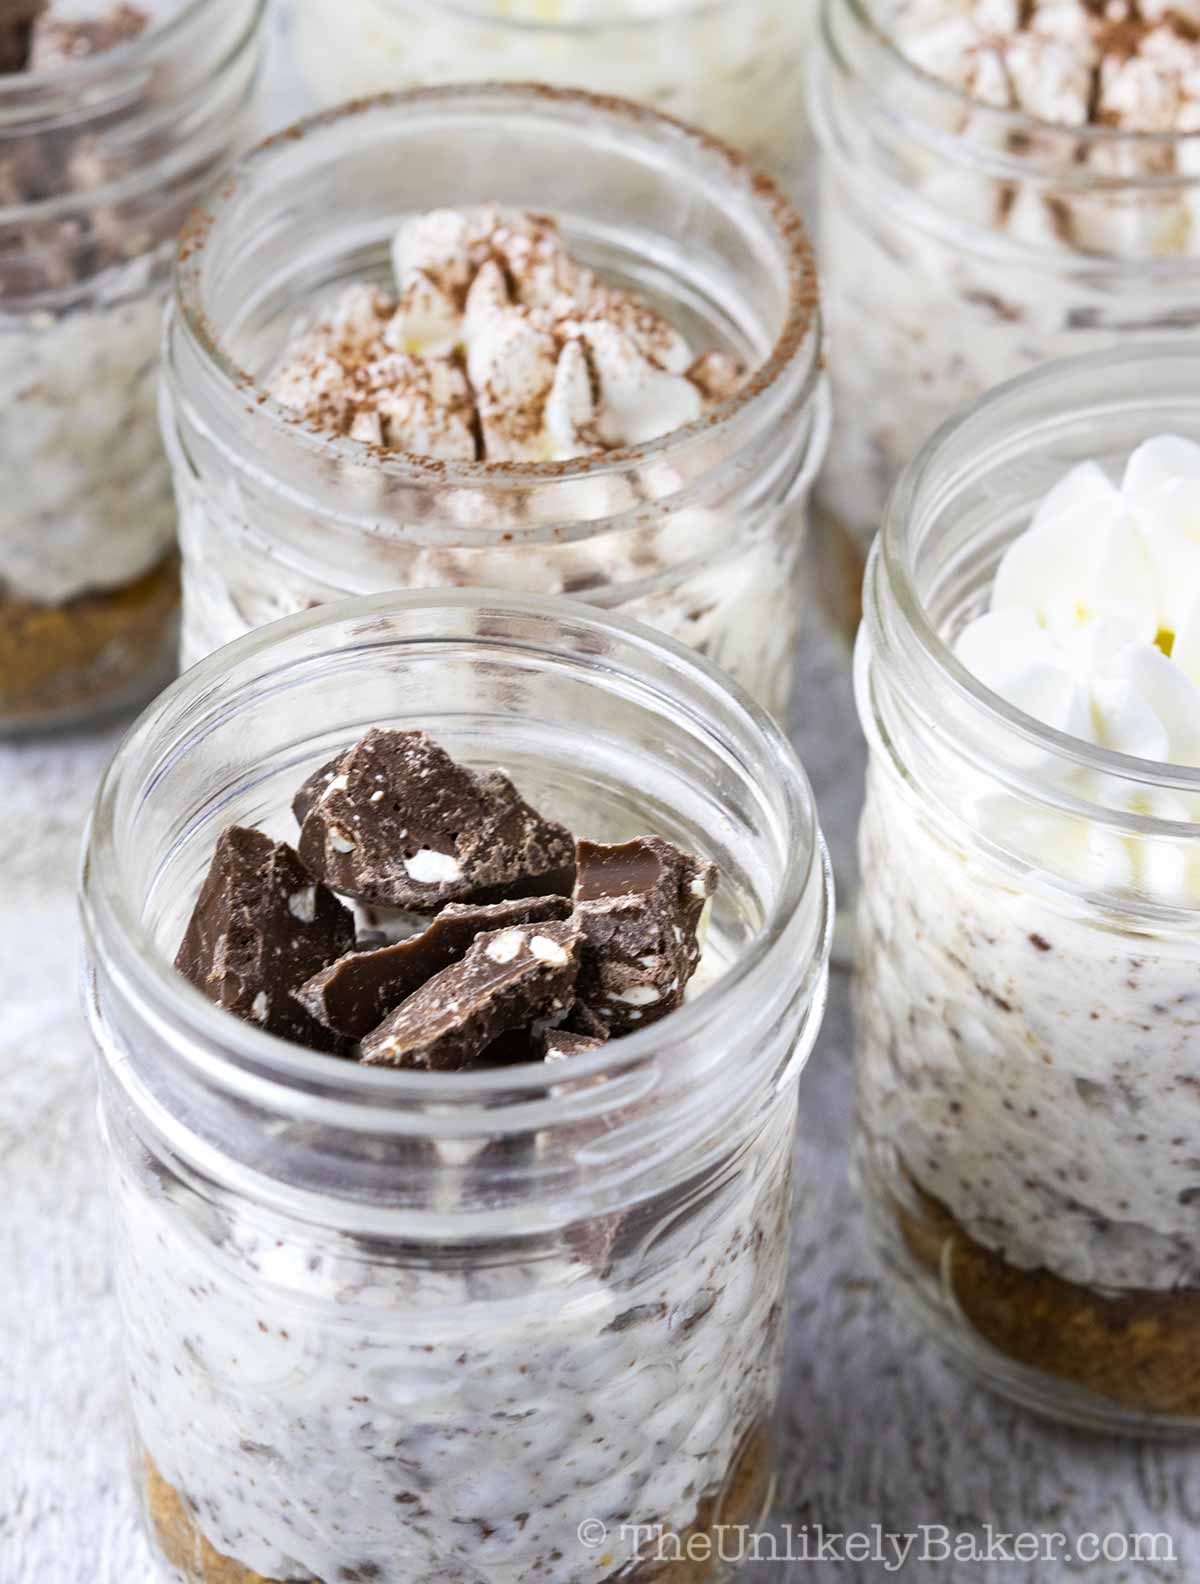 Jars of Toblerone cheesecake with a variety of toppings.